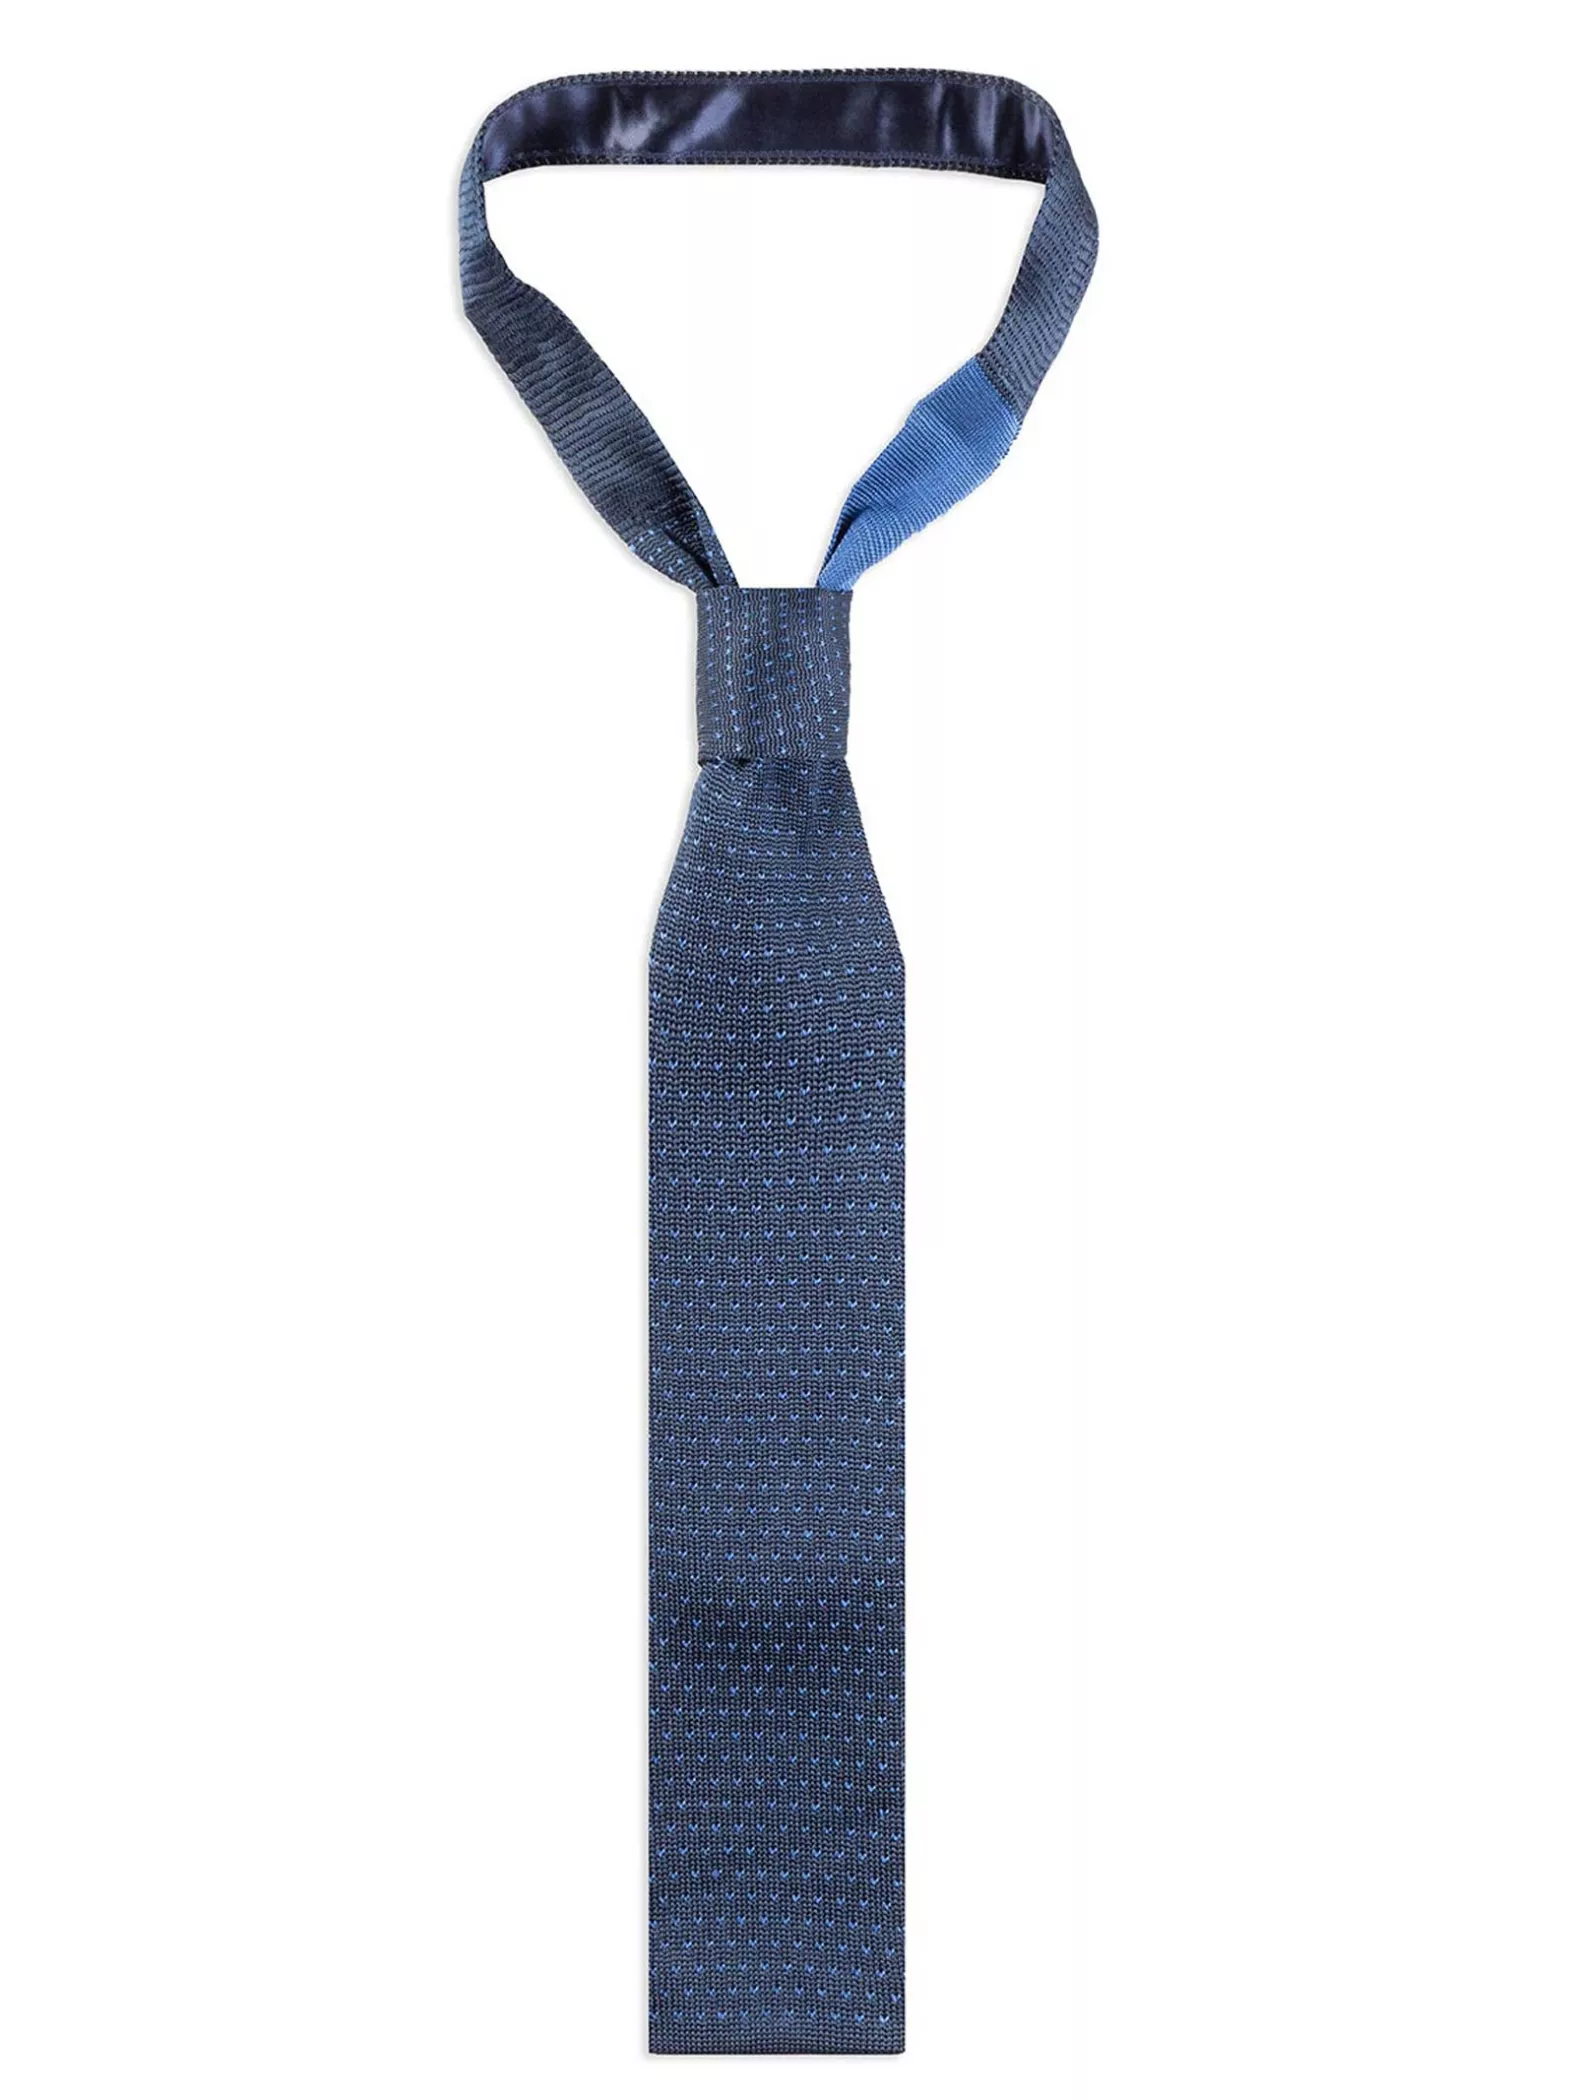 Men's Pure Silk Tie, Square Pinpoint Pattern - Refined and Elegant Style